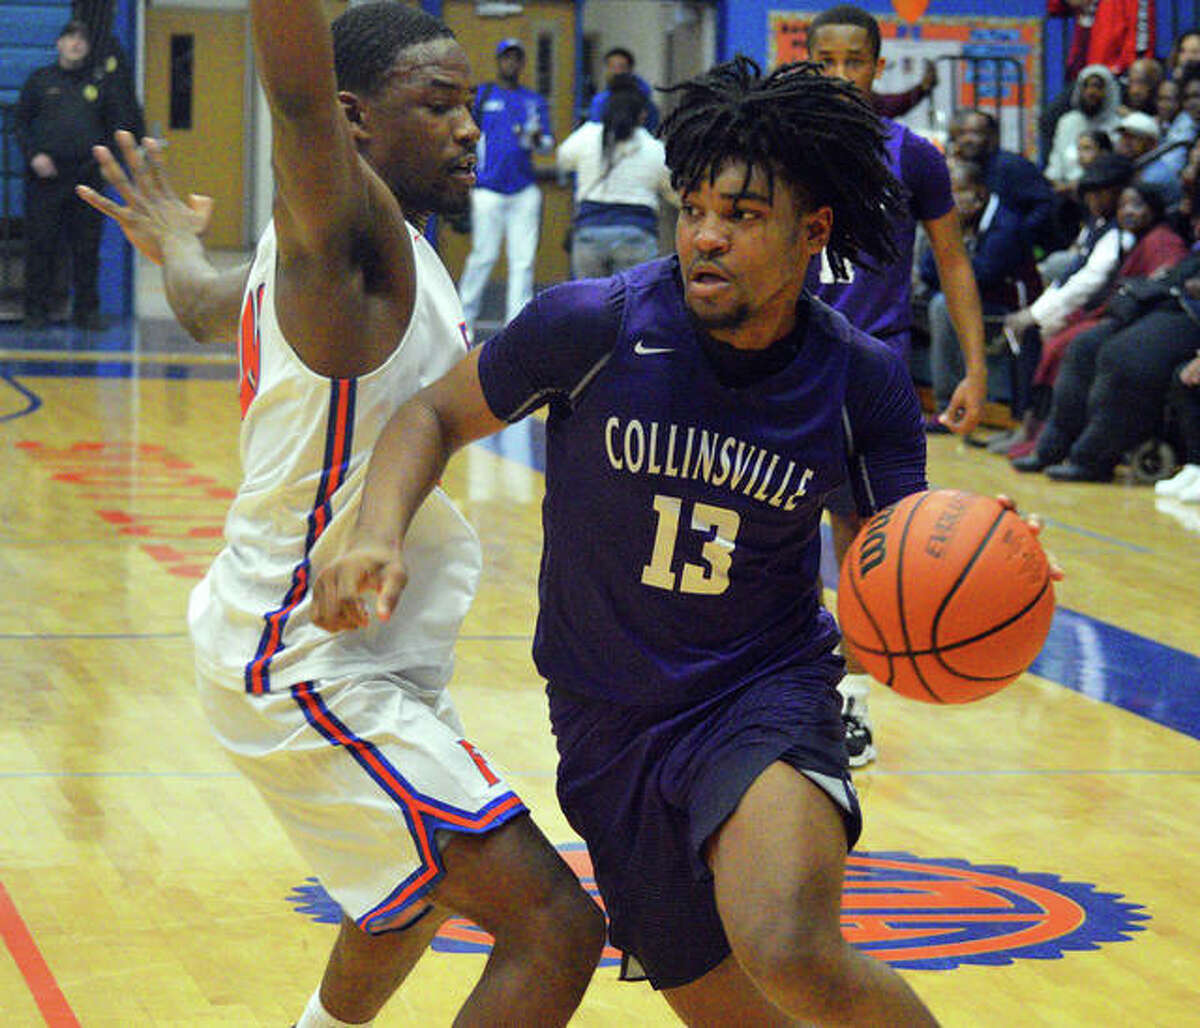 Collinsville guard Ray’Sean Taylor drives to the basket during a game at East St. Louis this season.